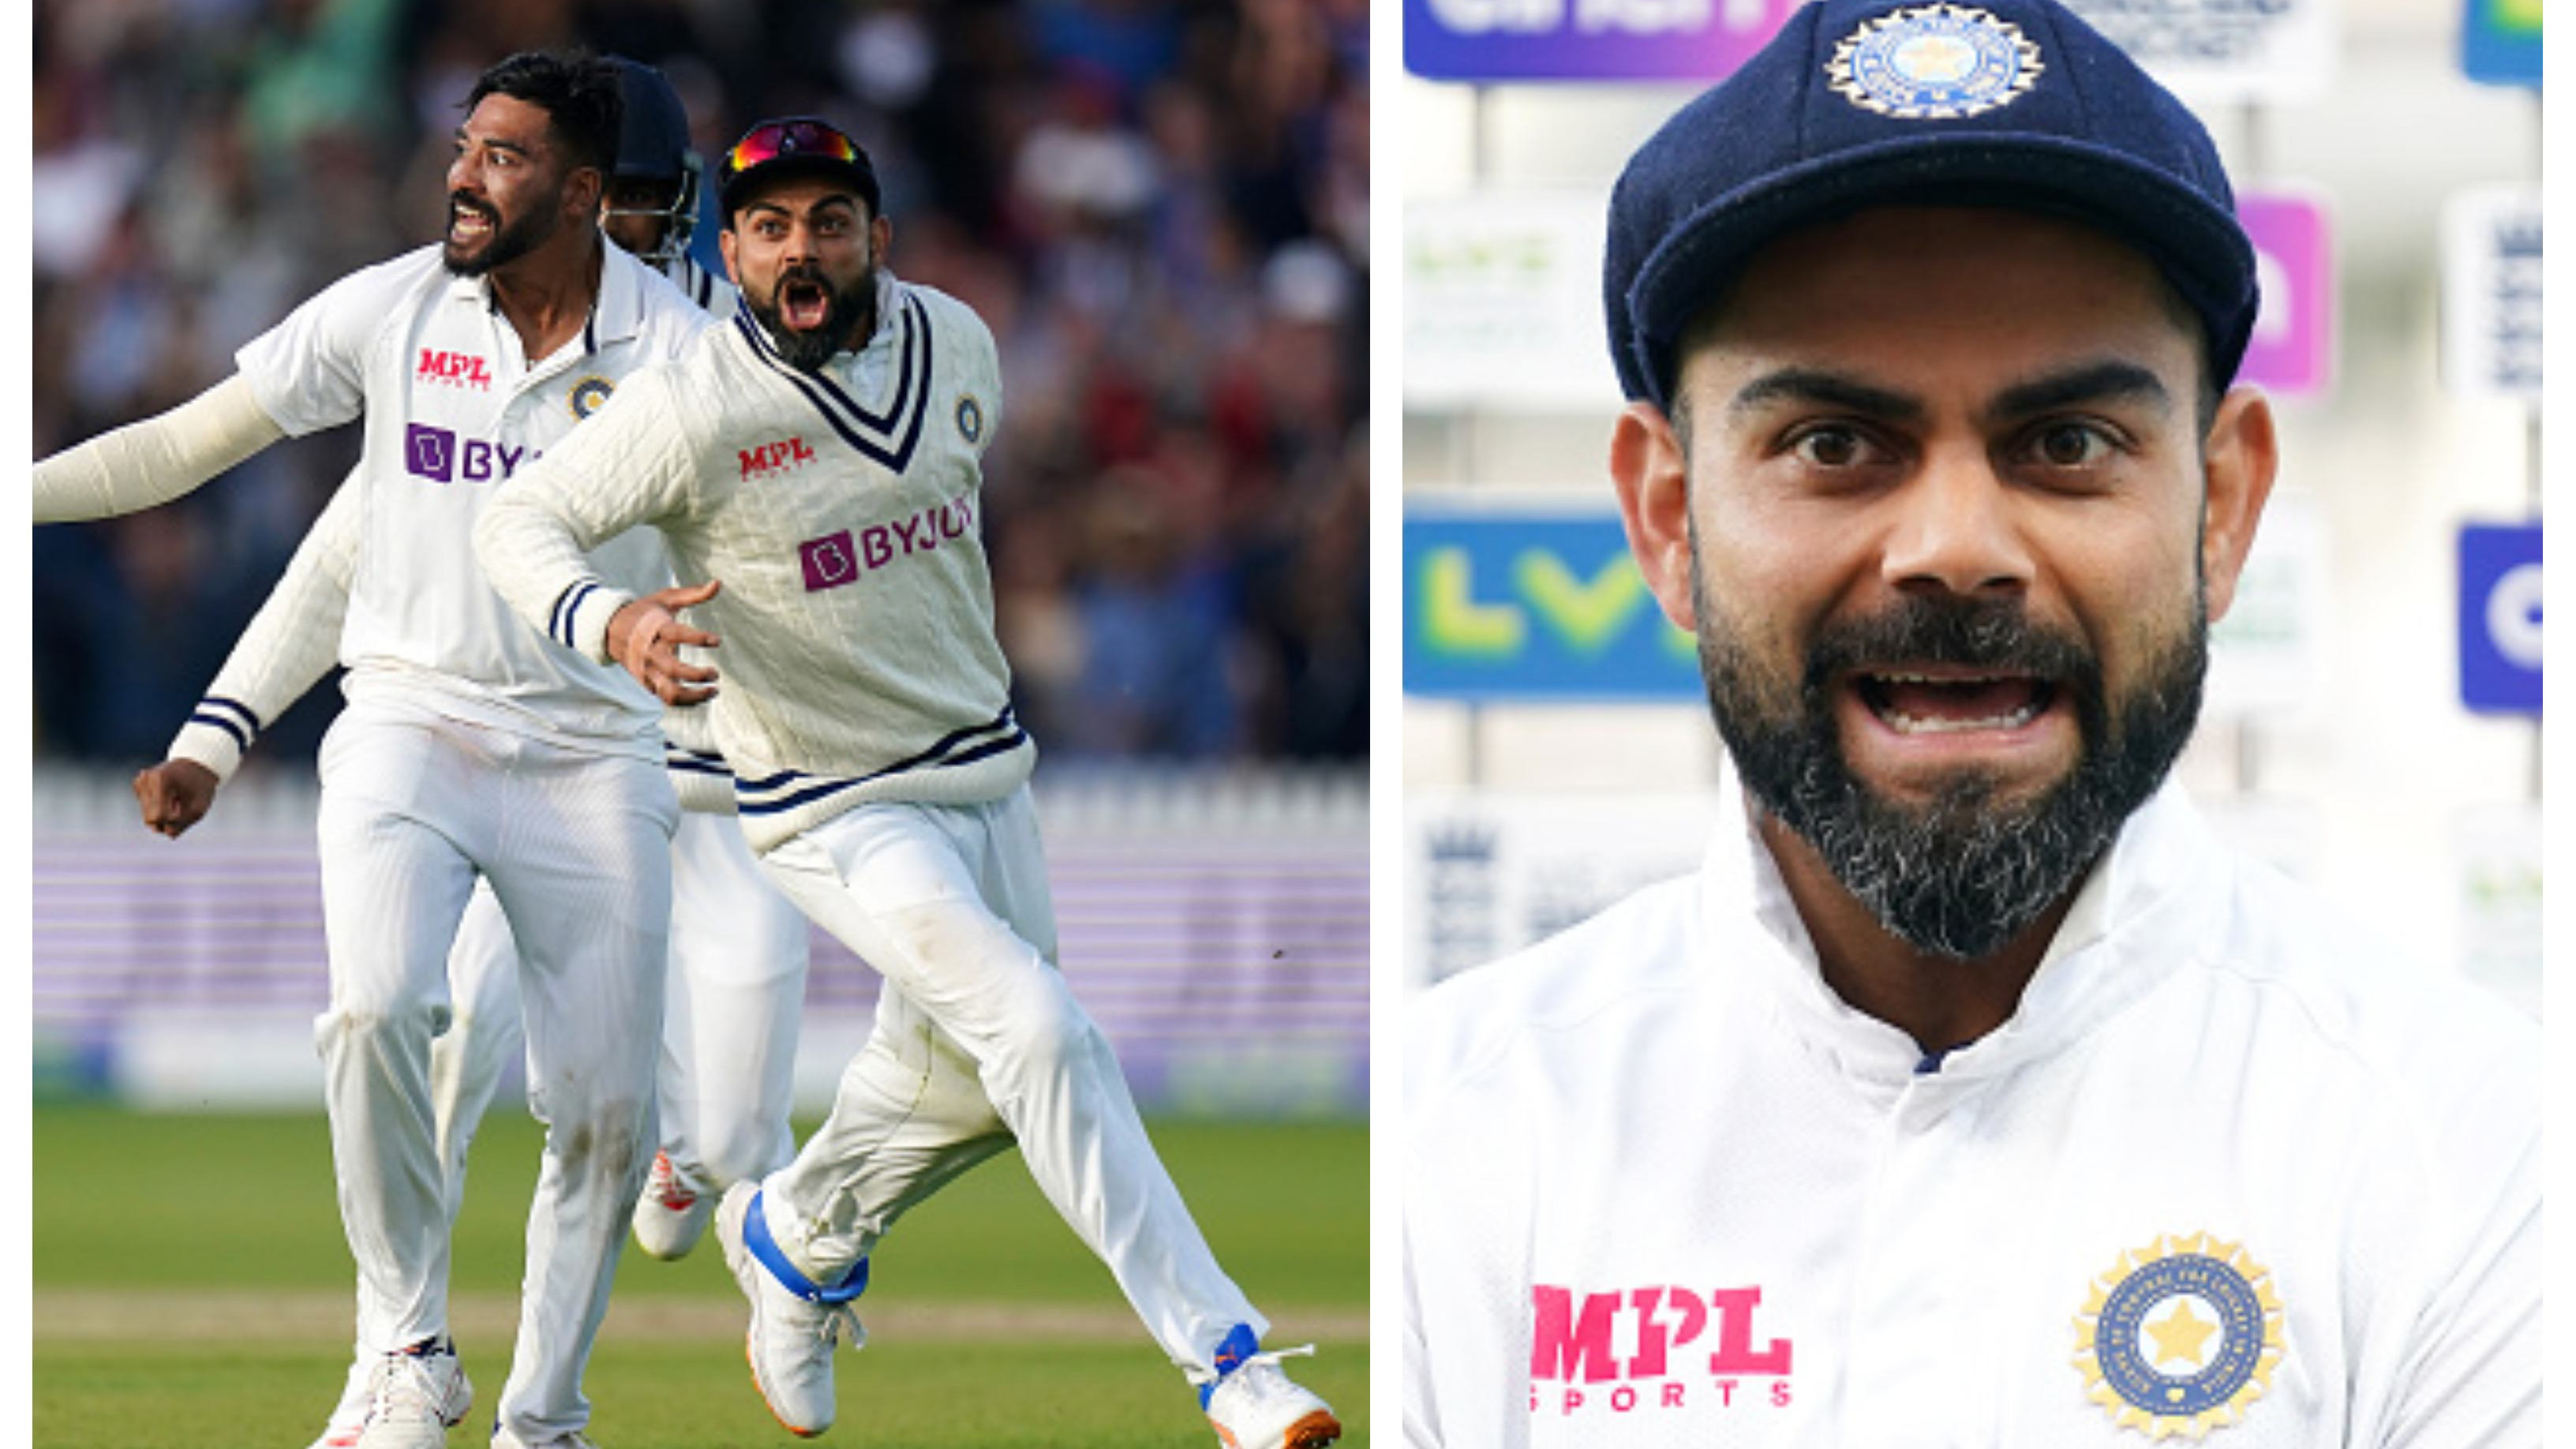 ENG v IND 2021: ‘We had the belief we can get them out in 60 overs’, Virat Kohli after India’s emphatic win at Lord’s